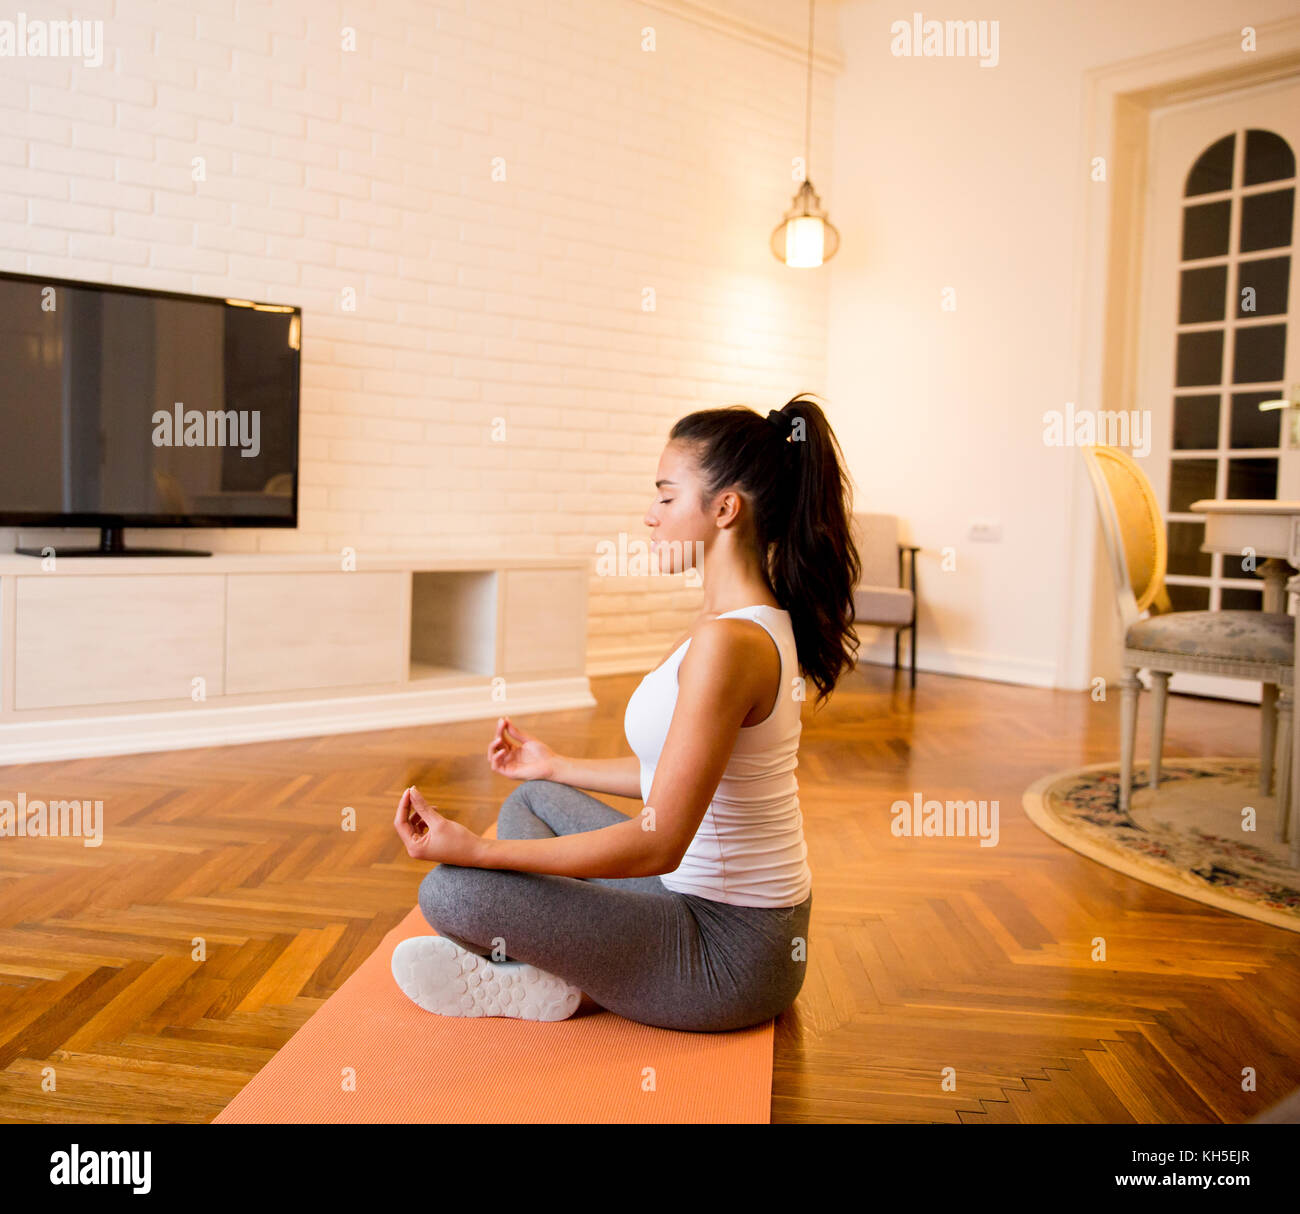 Young woman sitting on floor at home doing yoga meditation Stock Photo